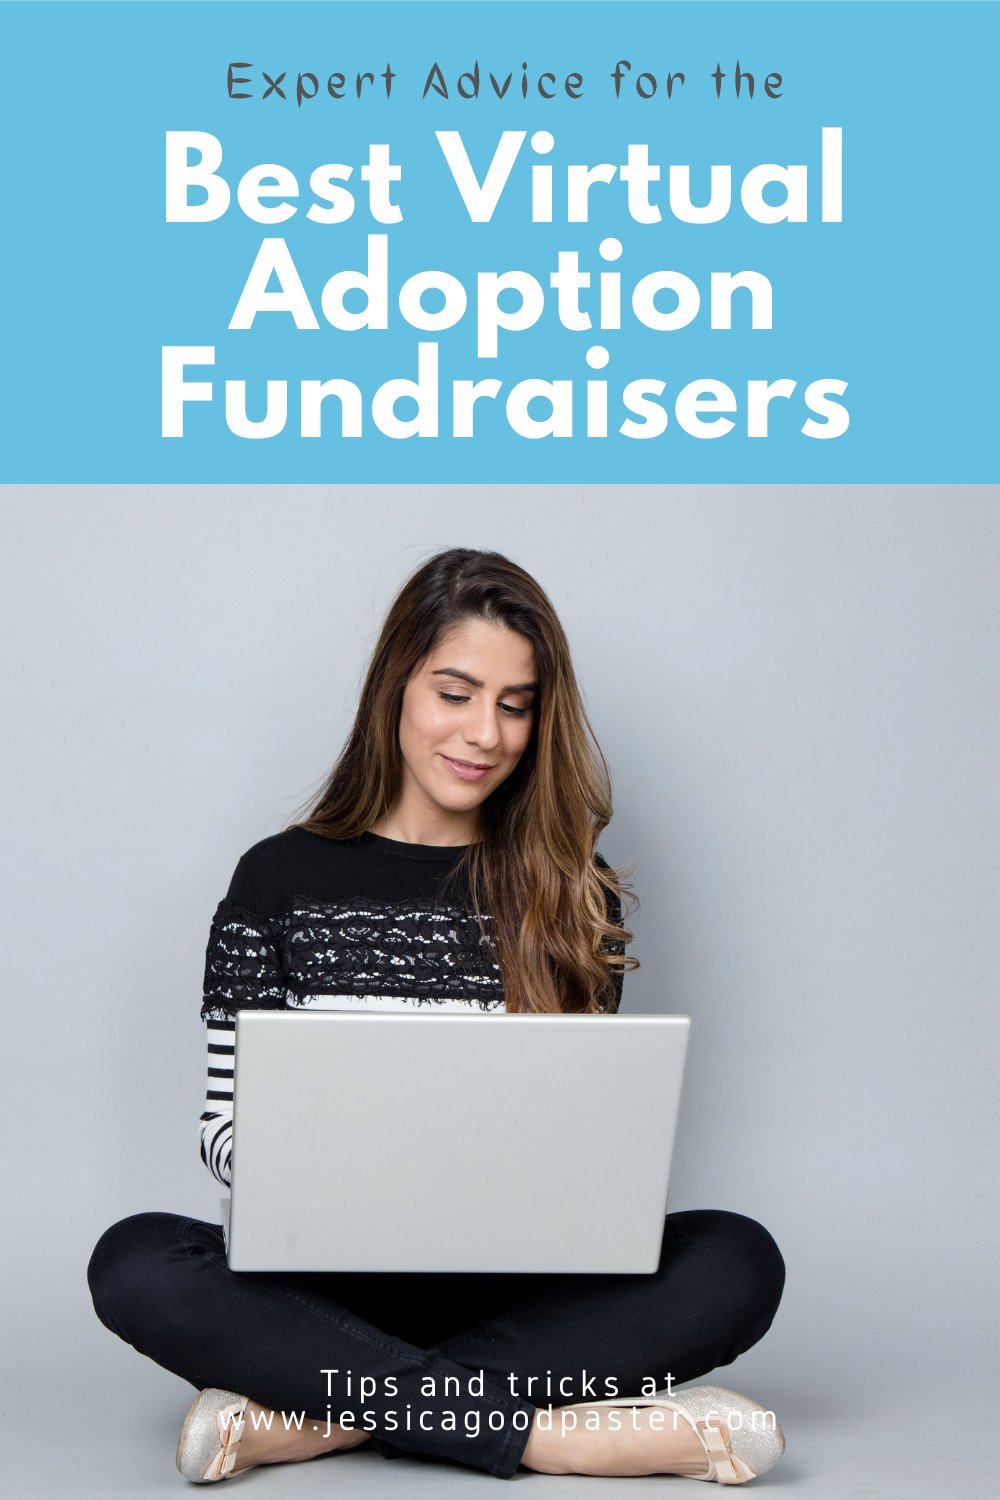 Best Virtual Adoption Fundraisers | Expert adoptive families share their tips, tricks, and ideas for the best virtual adoption fundraisers. Learn how to do online silent auctions, puzzle fundraisers, 100 squares, t-shirt sales, and more to fund your adoption from home. #adoption #fundraiser #adoptionfundraiser #virtualfundraiser #onlinefundraiser